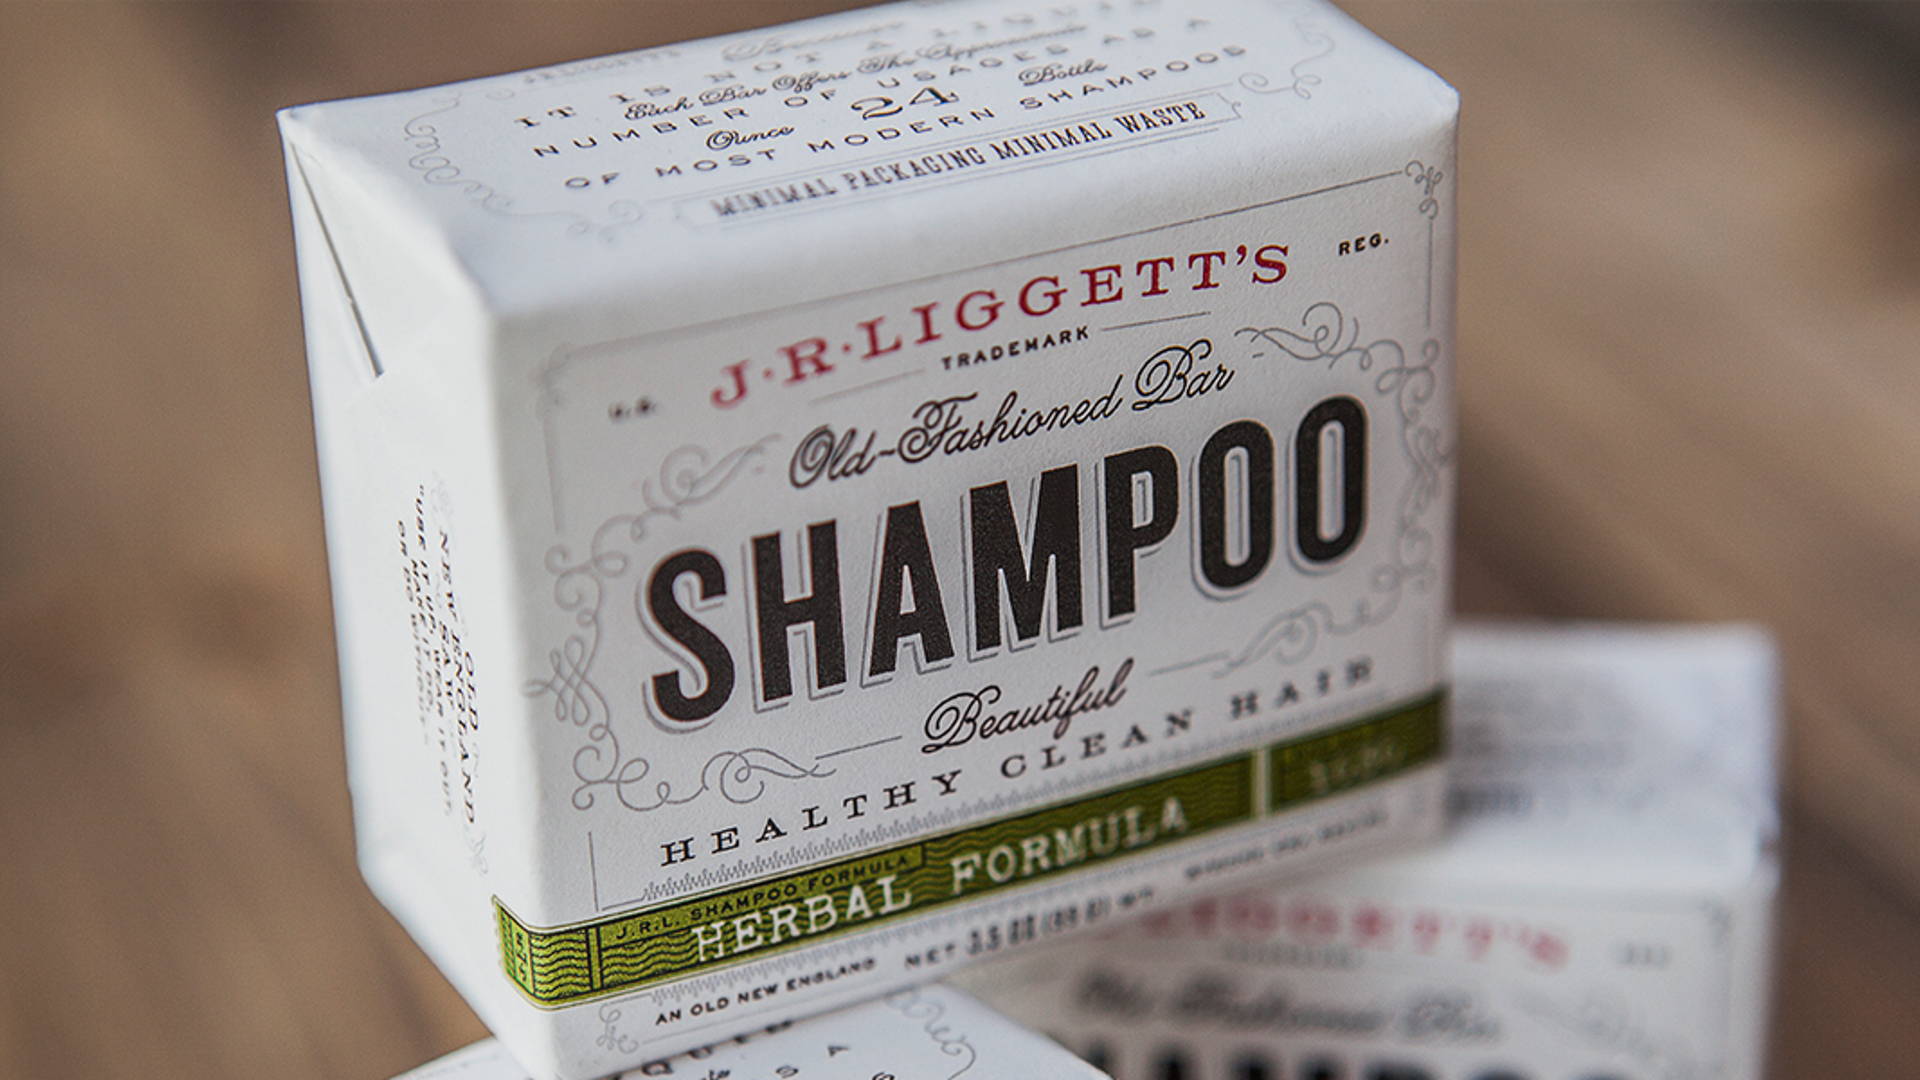 Featured image for J.R. Liggett's Shampoo